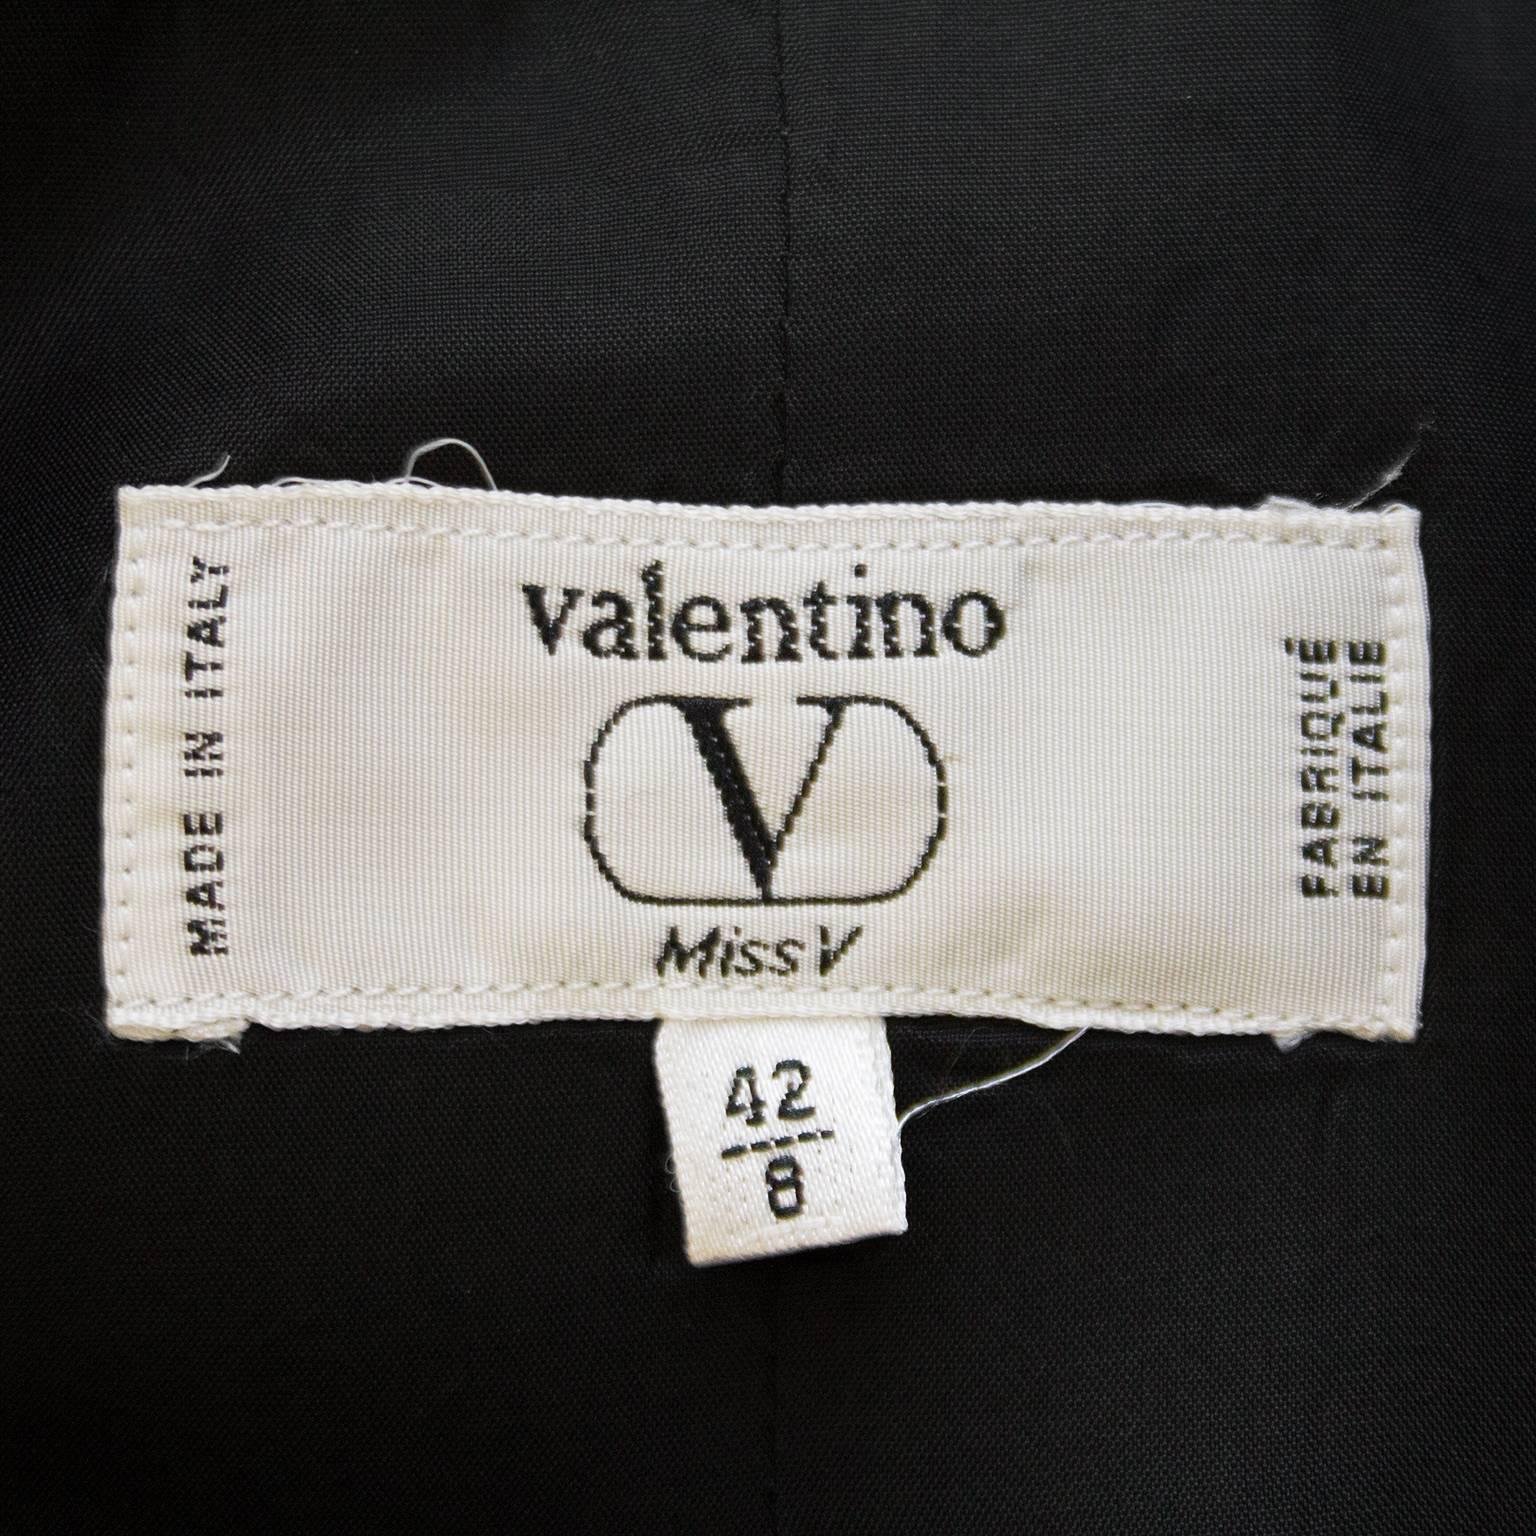 1980s Valentino Miss V Oversized Black Jacket With Gold Buttons In Excellent Condition For Sale In Toronto, Ontario